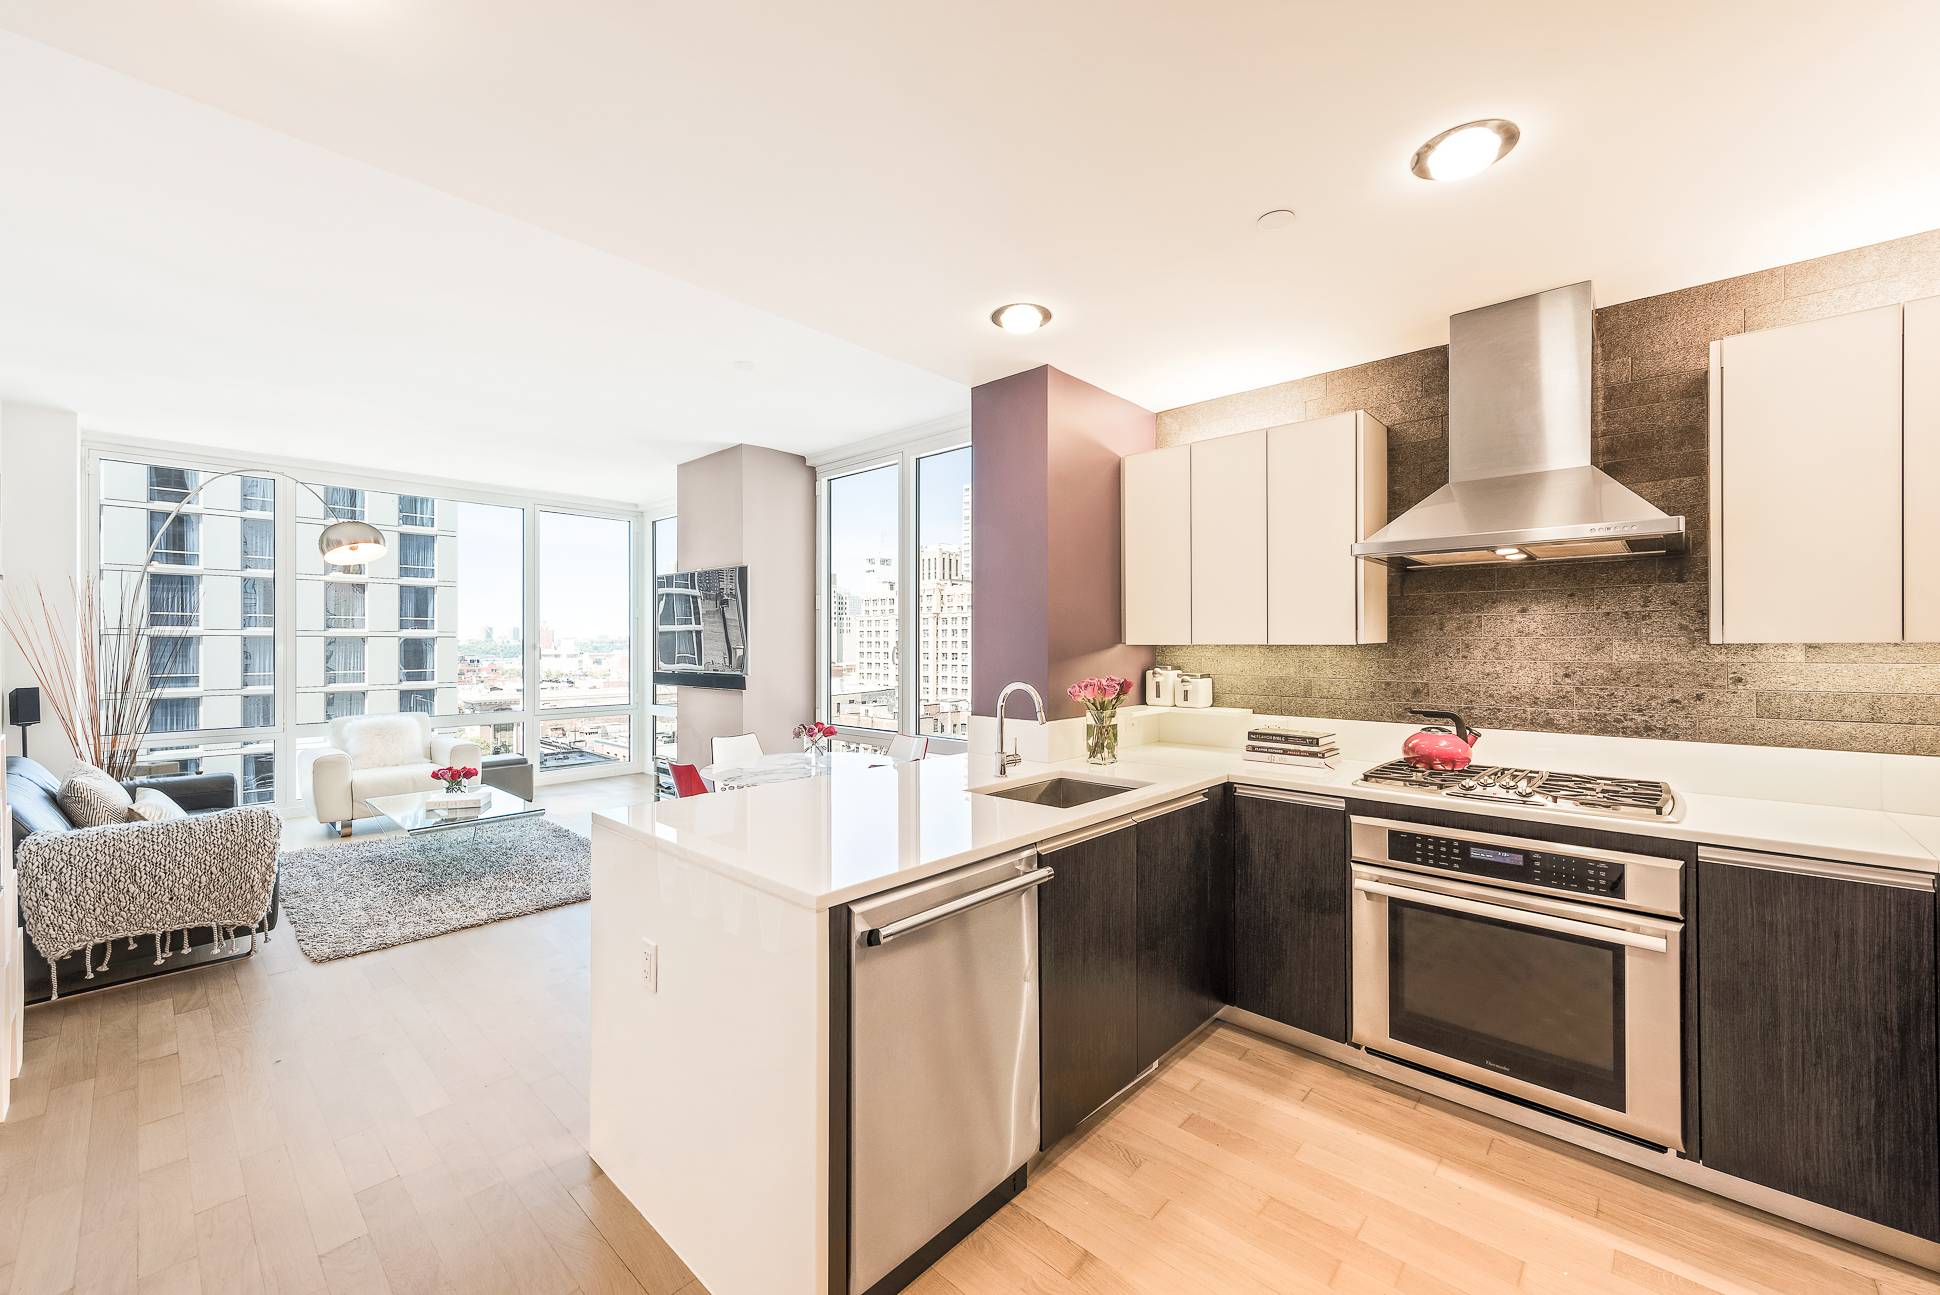 FLAWLESS AND SUPERIOR ONE BEDROOM / PLATINUM CONDO 247 WEST 46TH STREET